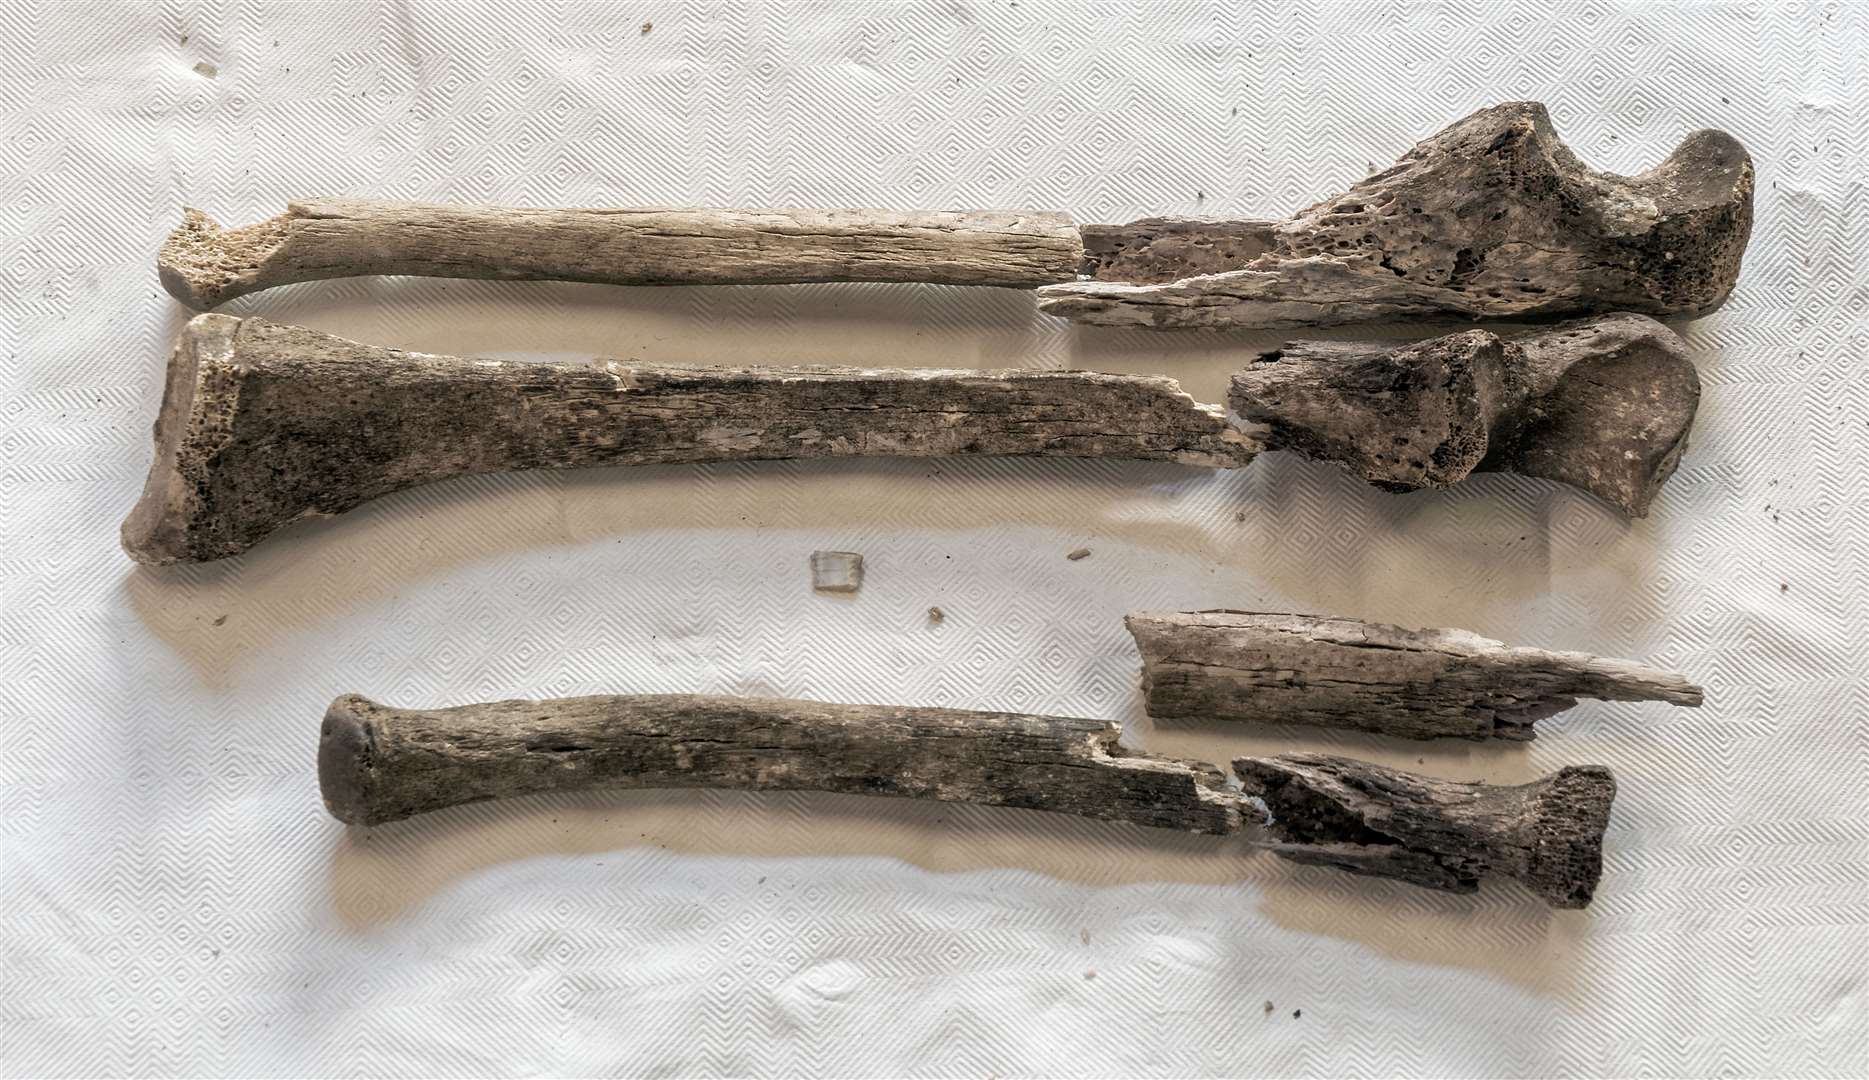 The bones have now been subjected to radiocarbon dating. Copyright Kevin Harvey